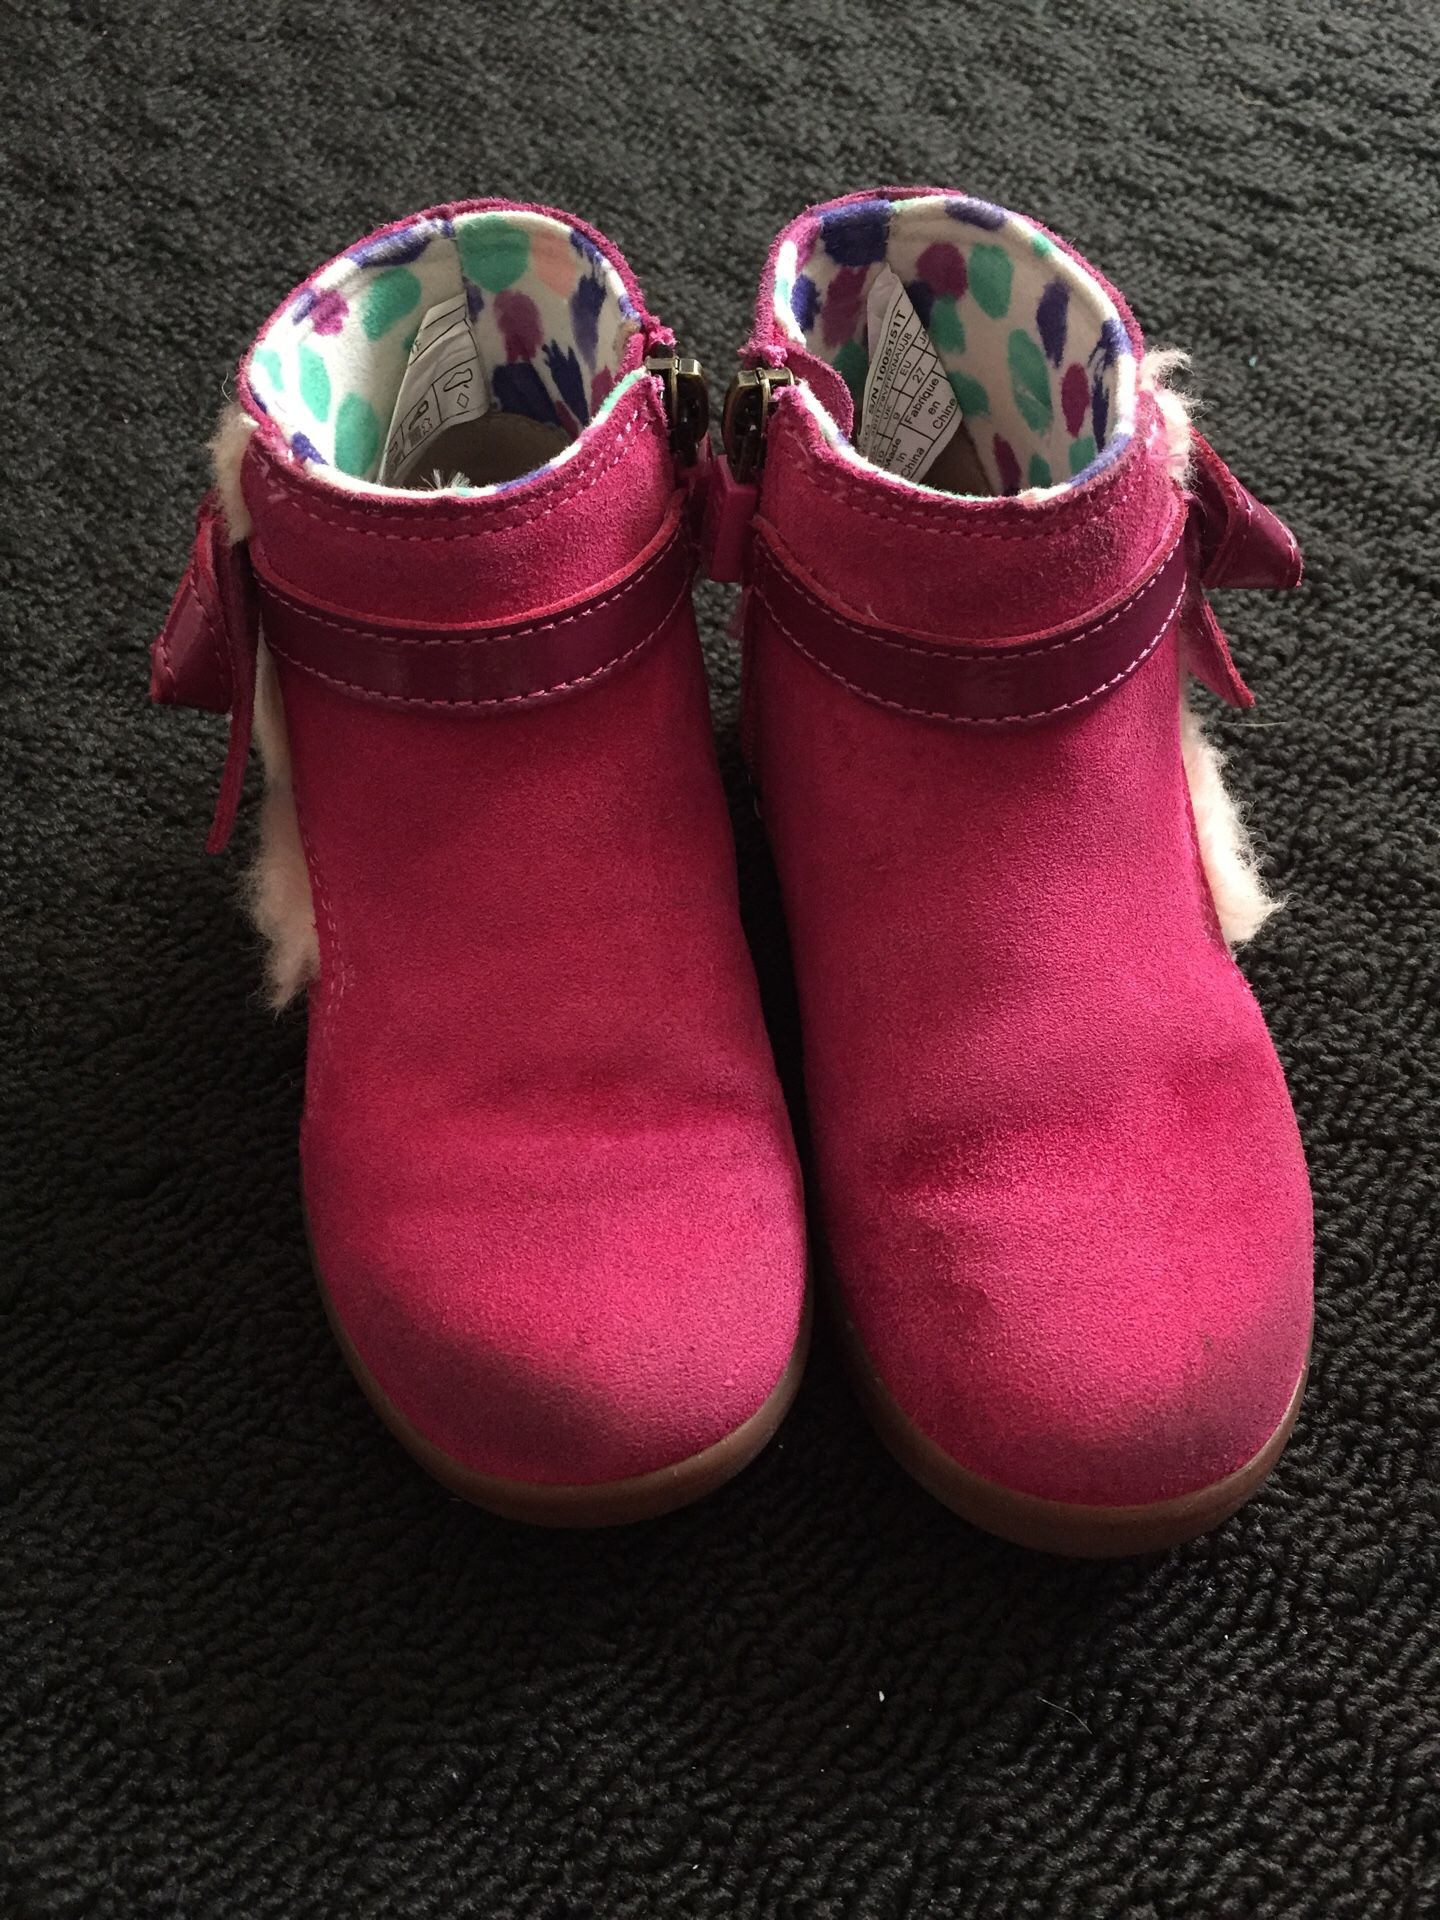 Ugg Boots toddler girl size 10